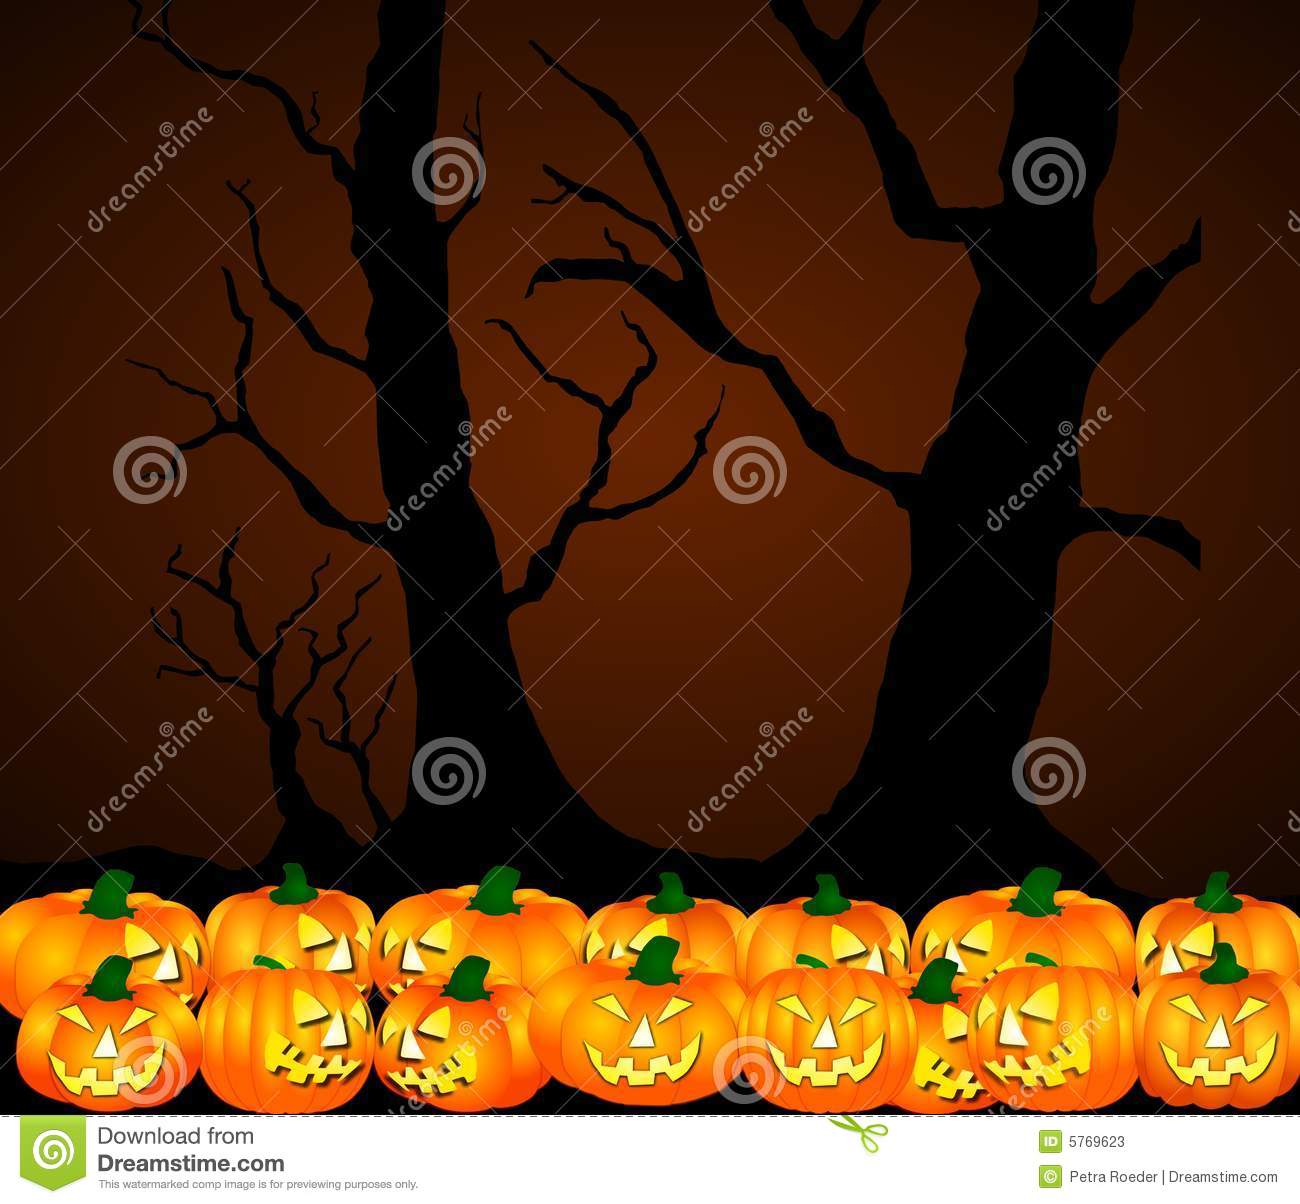 An Illustrated Halloween Background With Pumpkins And Trees At Night